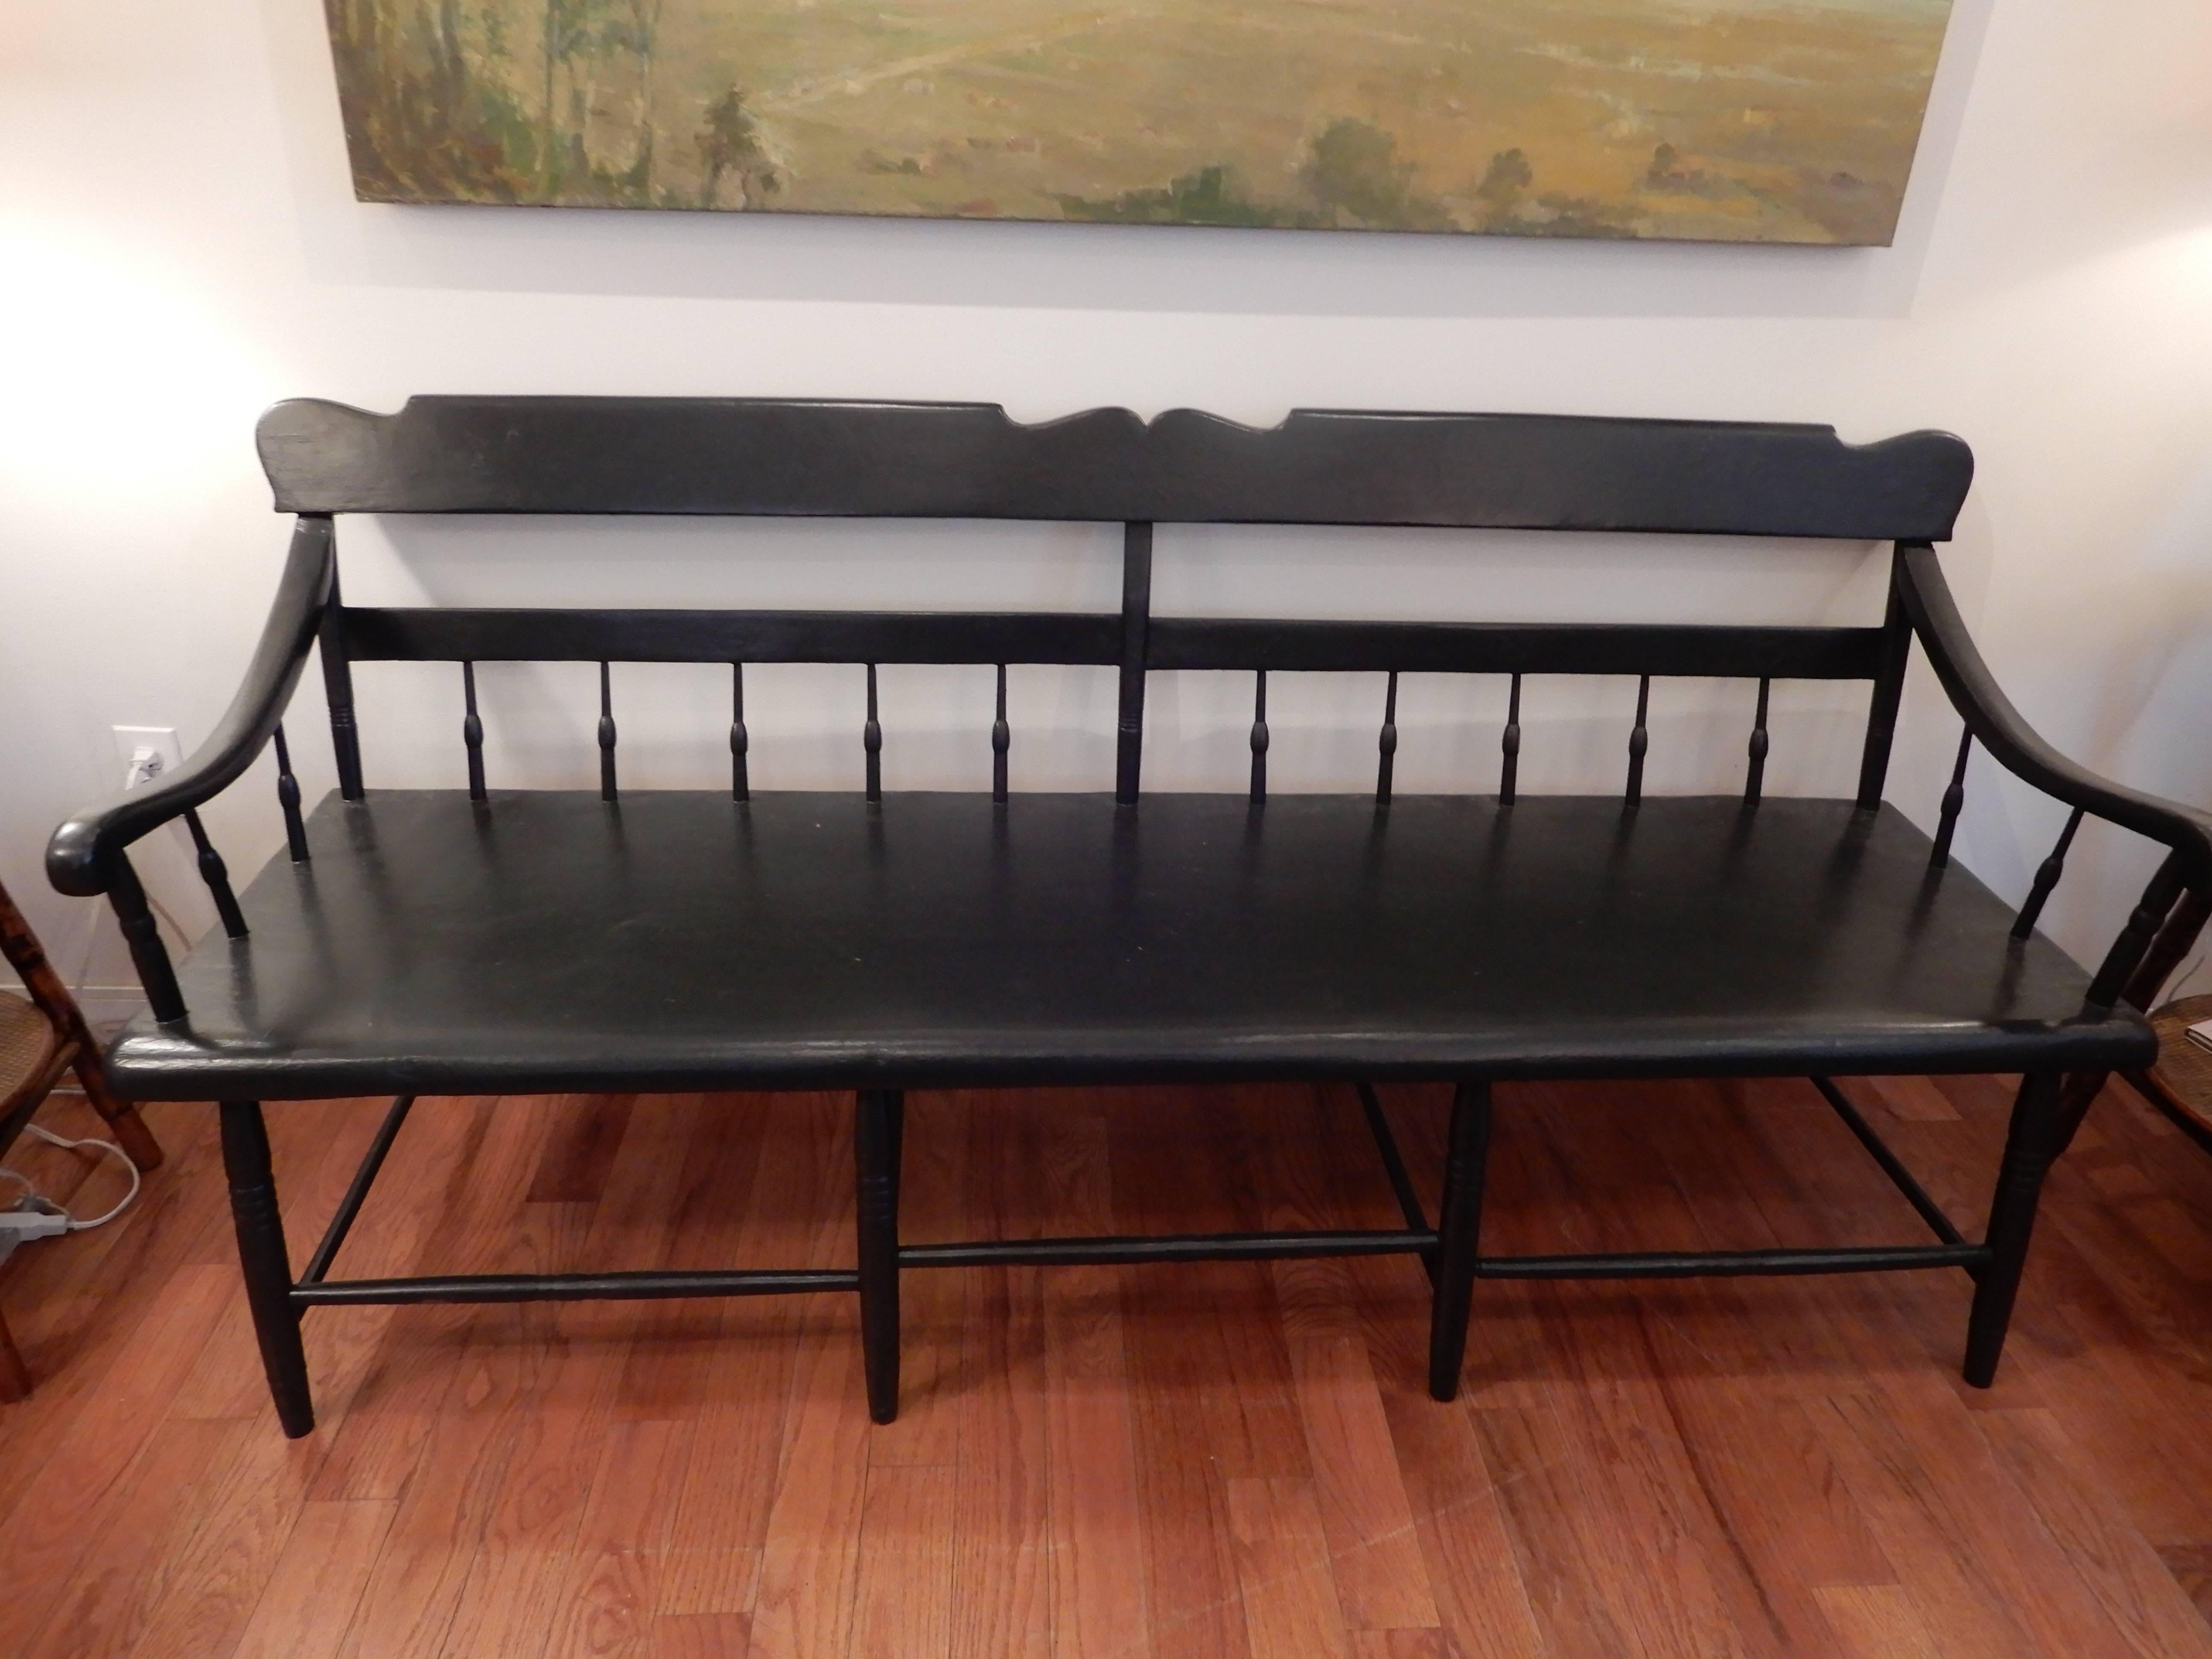 A late 19th Century  Pennsylvania  Dutch Deacons bench. Great condition,painted black,works great in an entrance way,or as dining seating,anywhere.